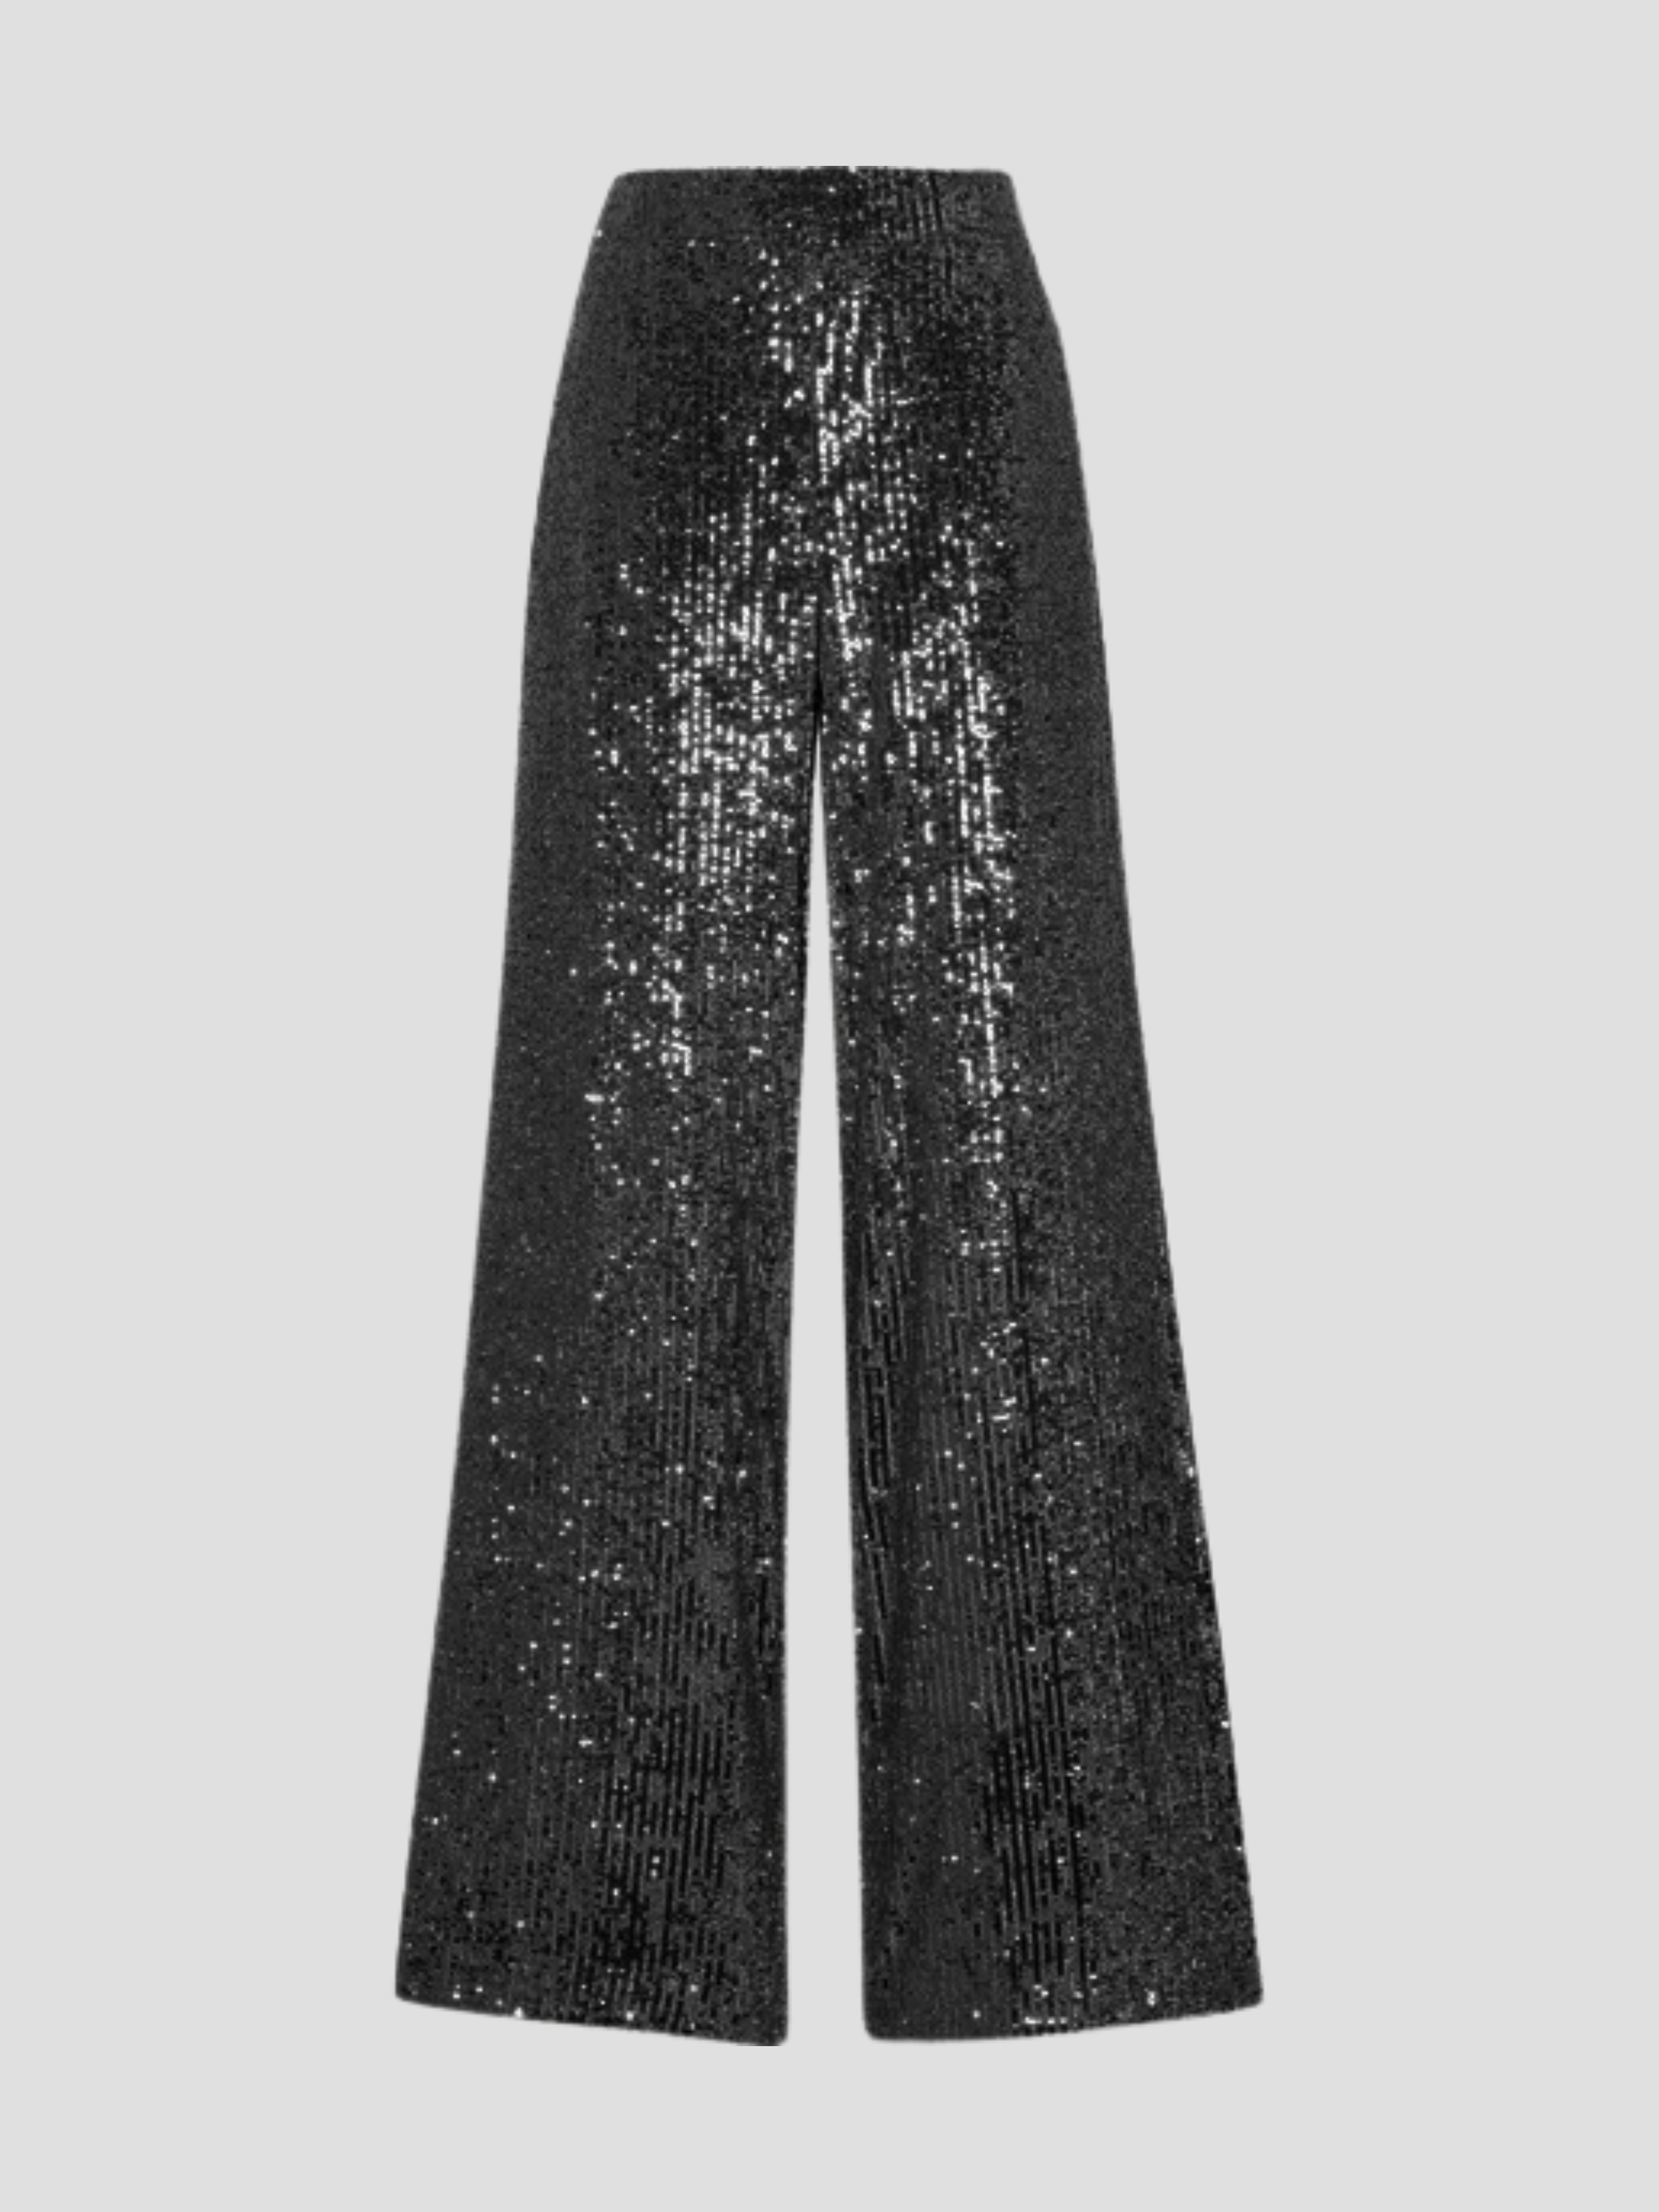 M&S fans in frenzy over sequin trousers with elasticated waist - they're  perfect for Christmas parties | The Irish Sun